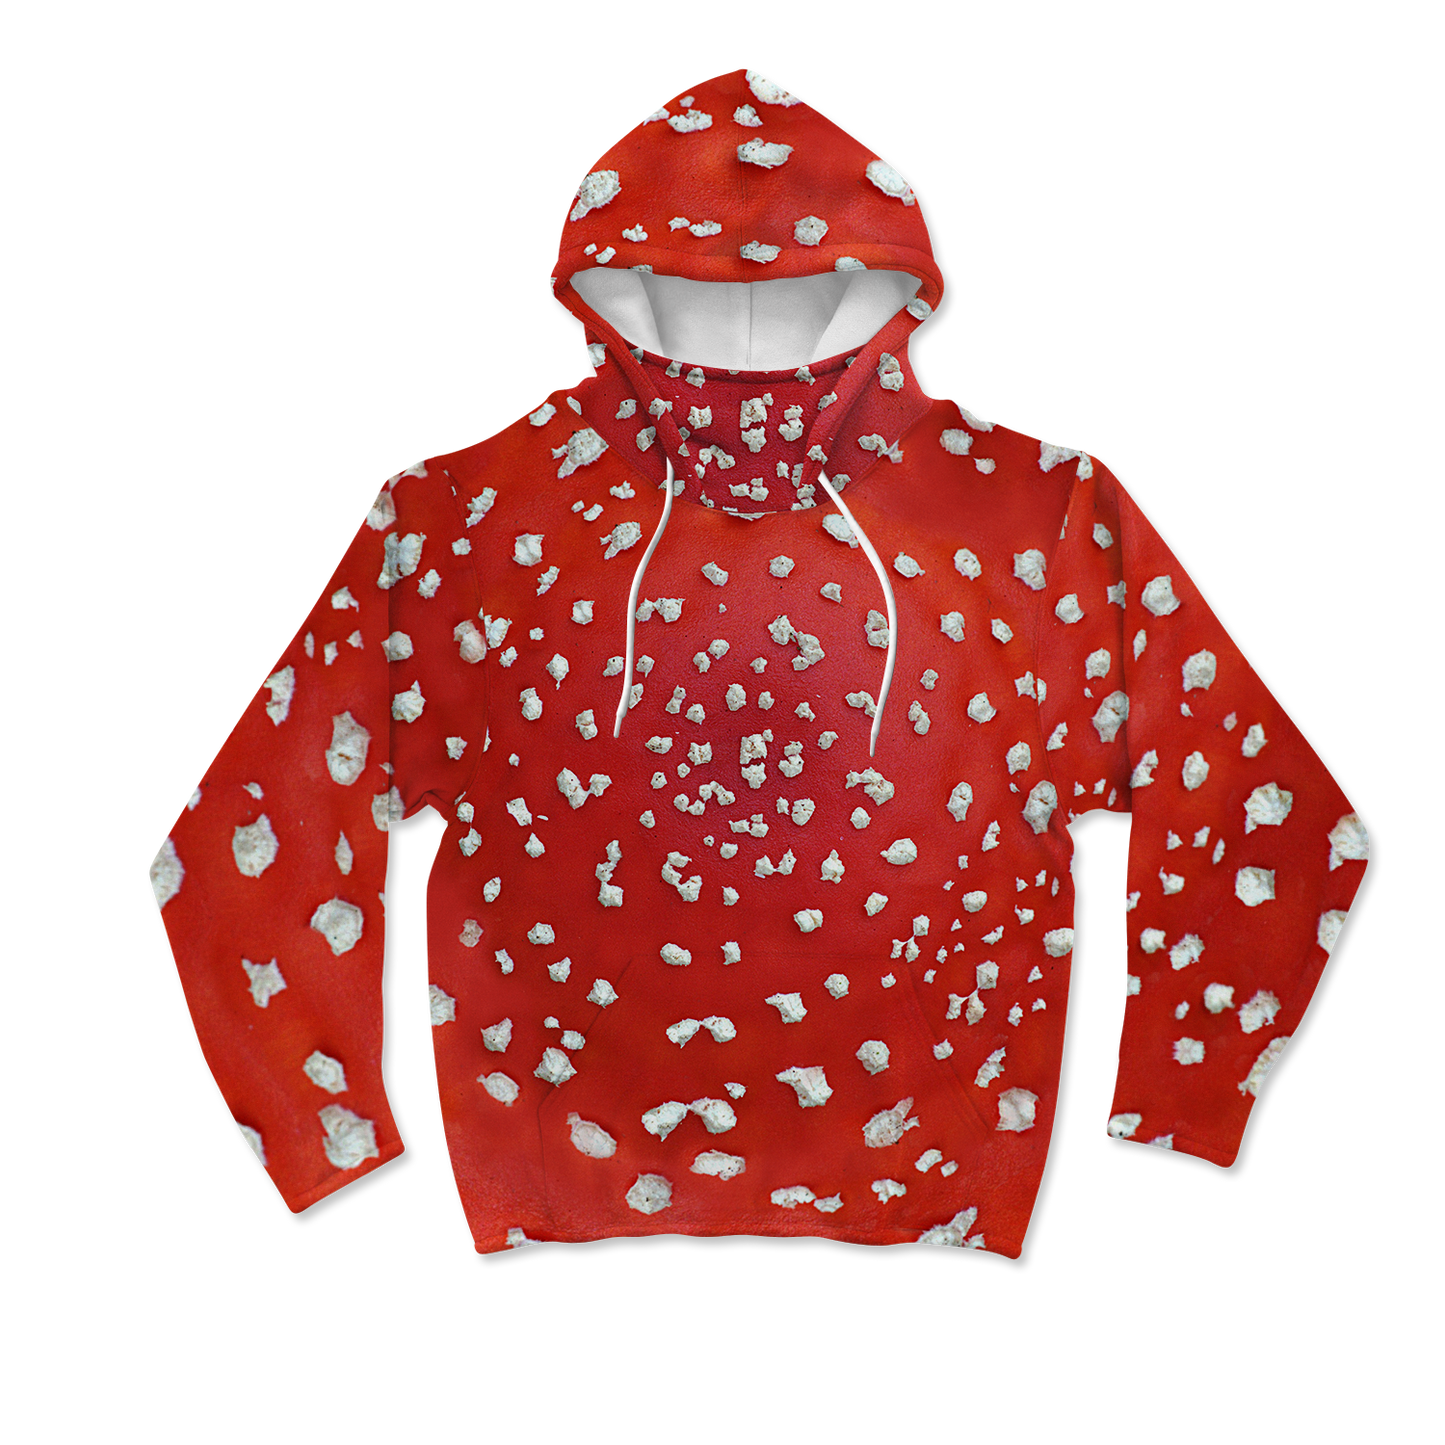 Fly Agaric - Amanita All Over Print Mask Hoodie